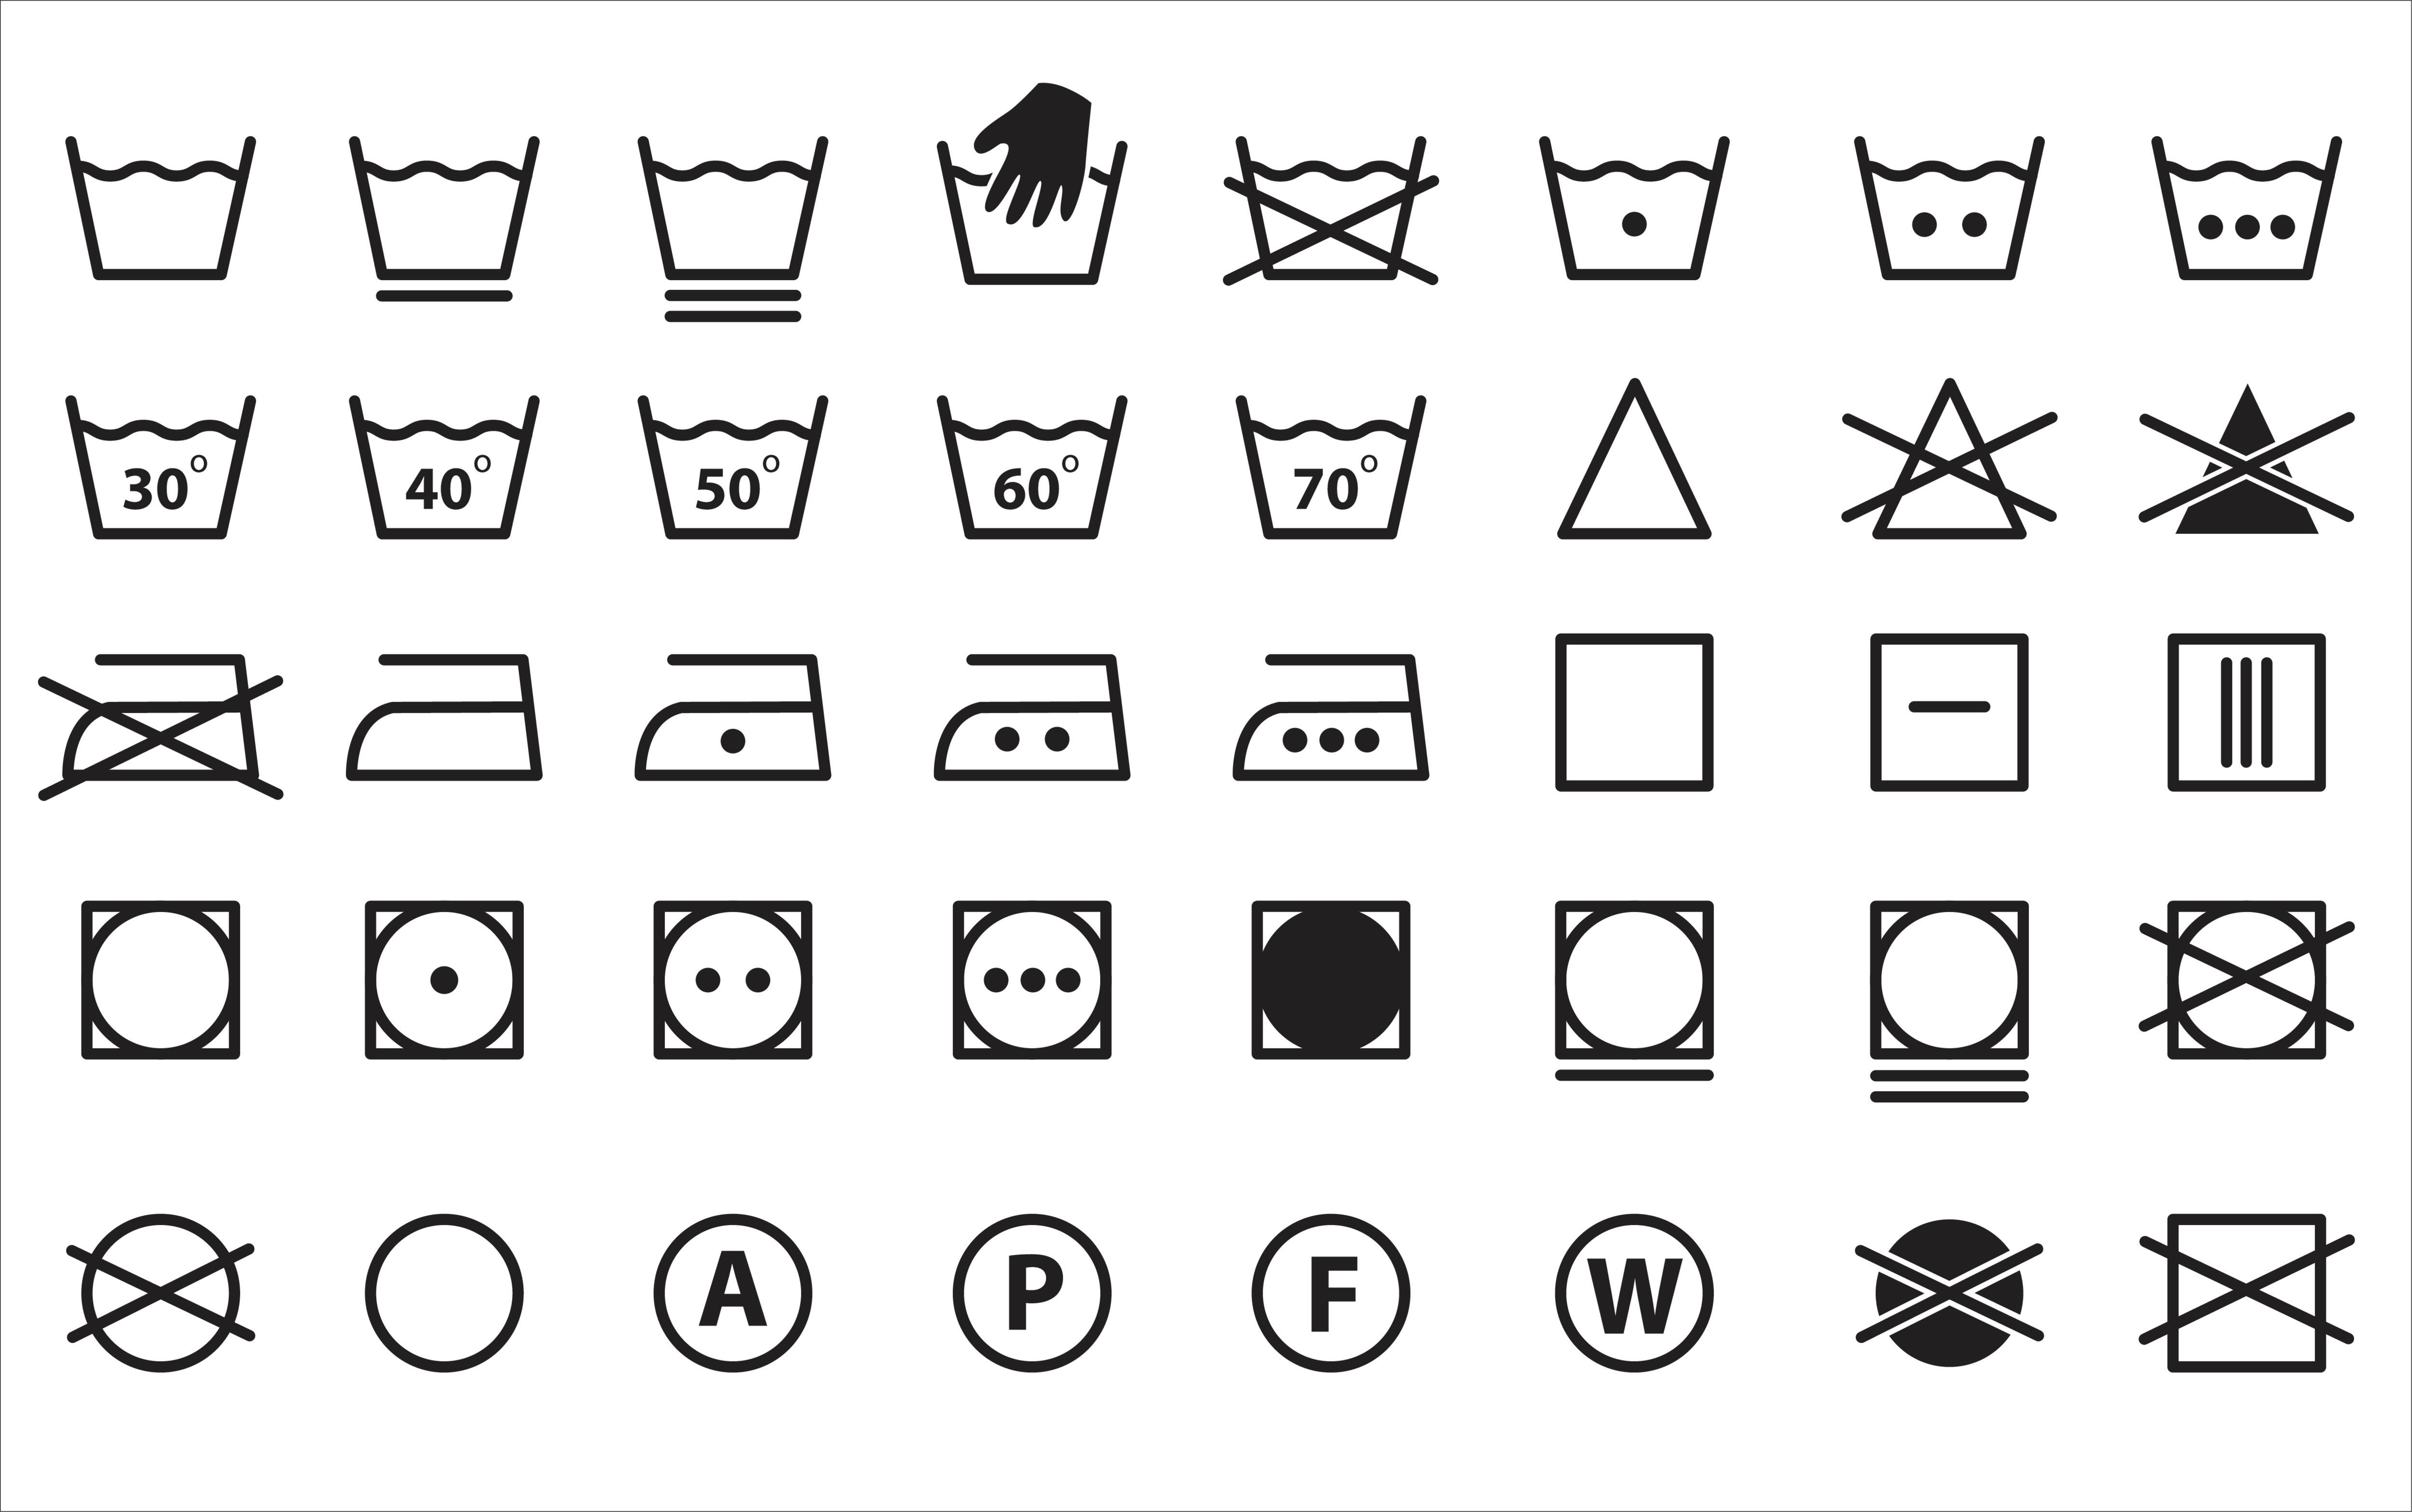 laundry-symbols-an-expert-guide-to-what-they-mean